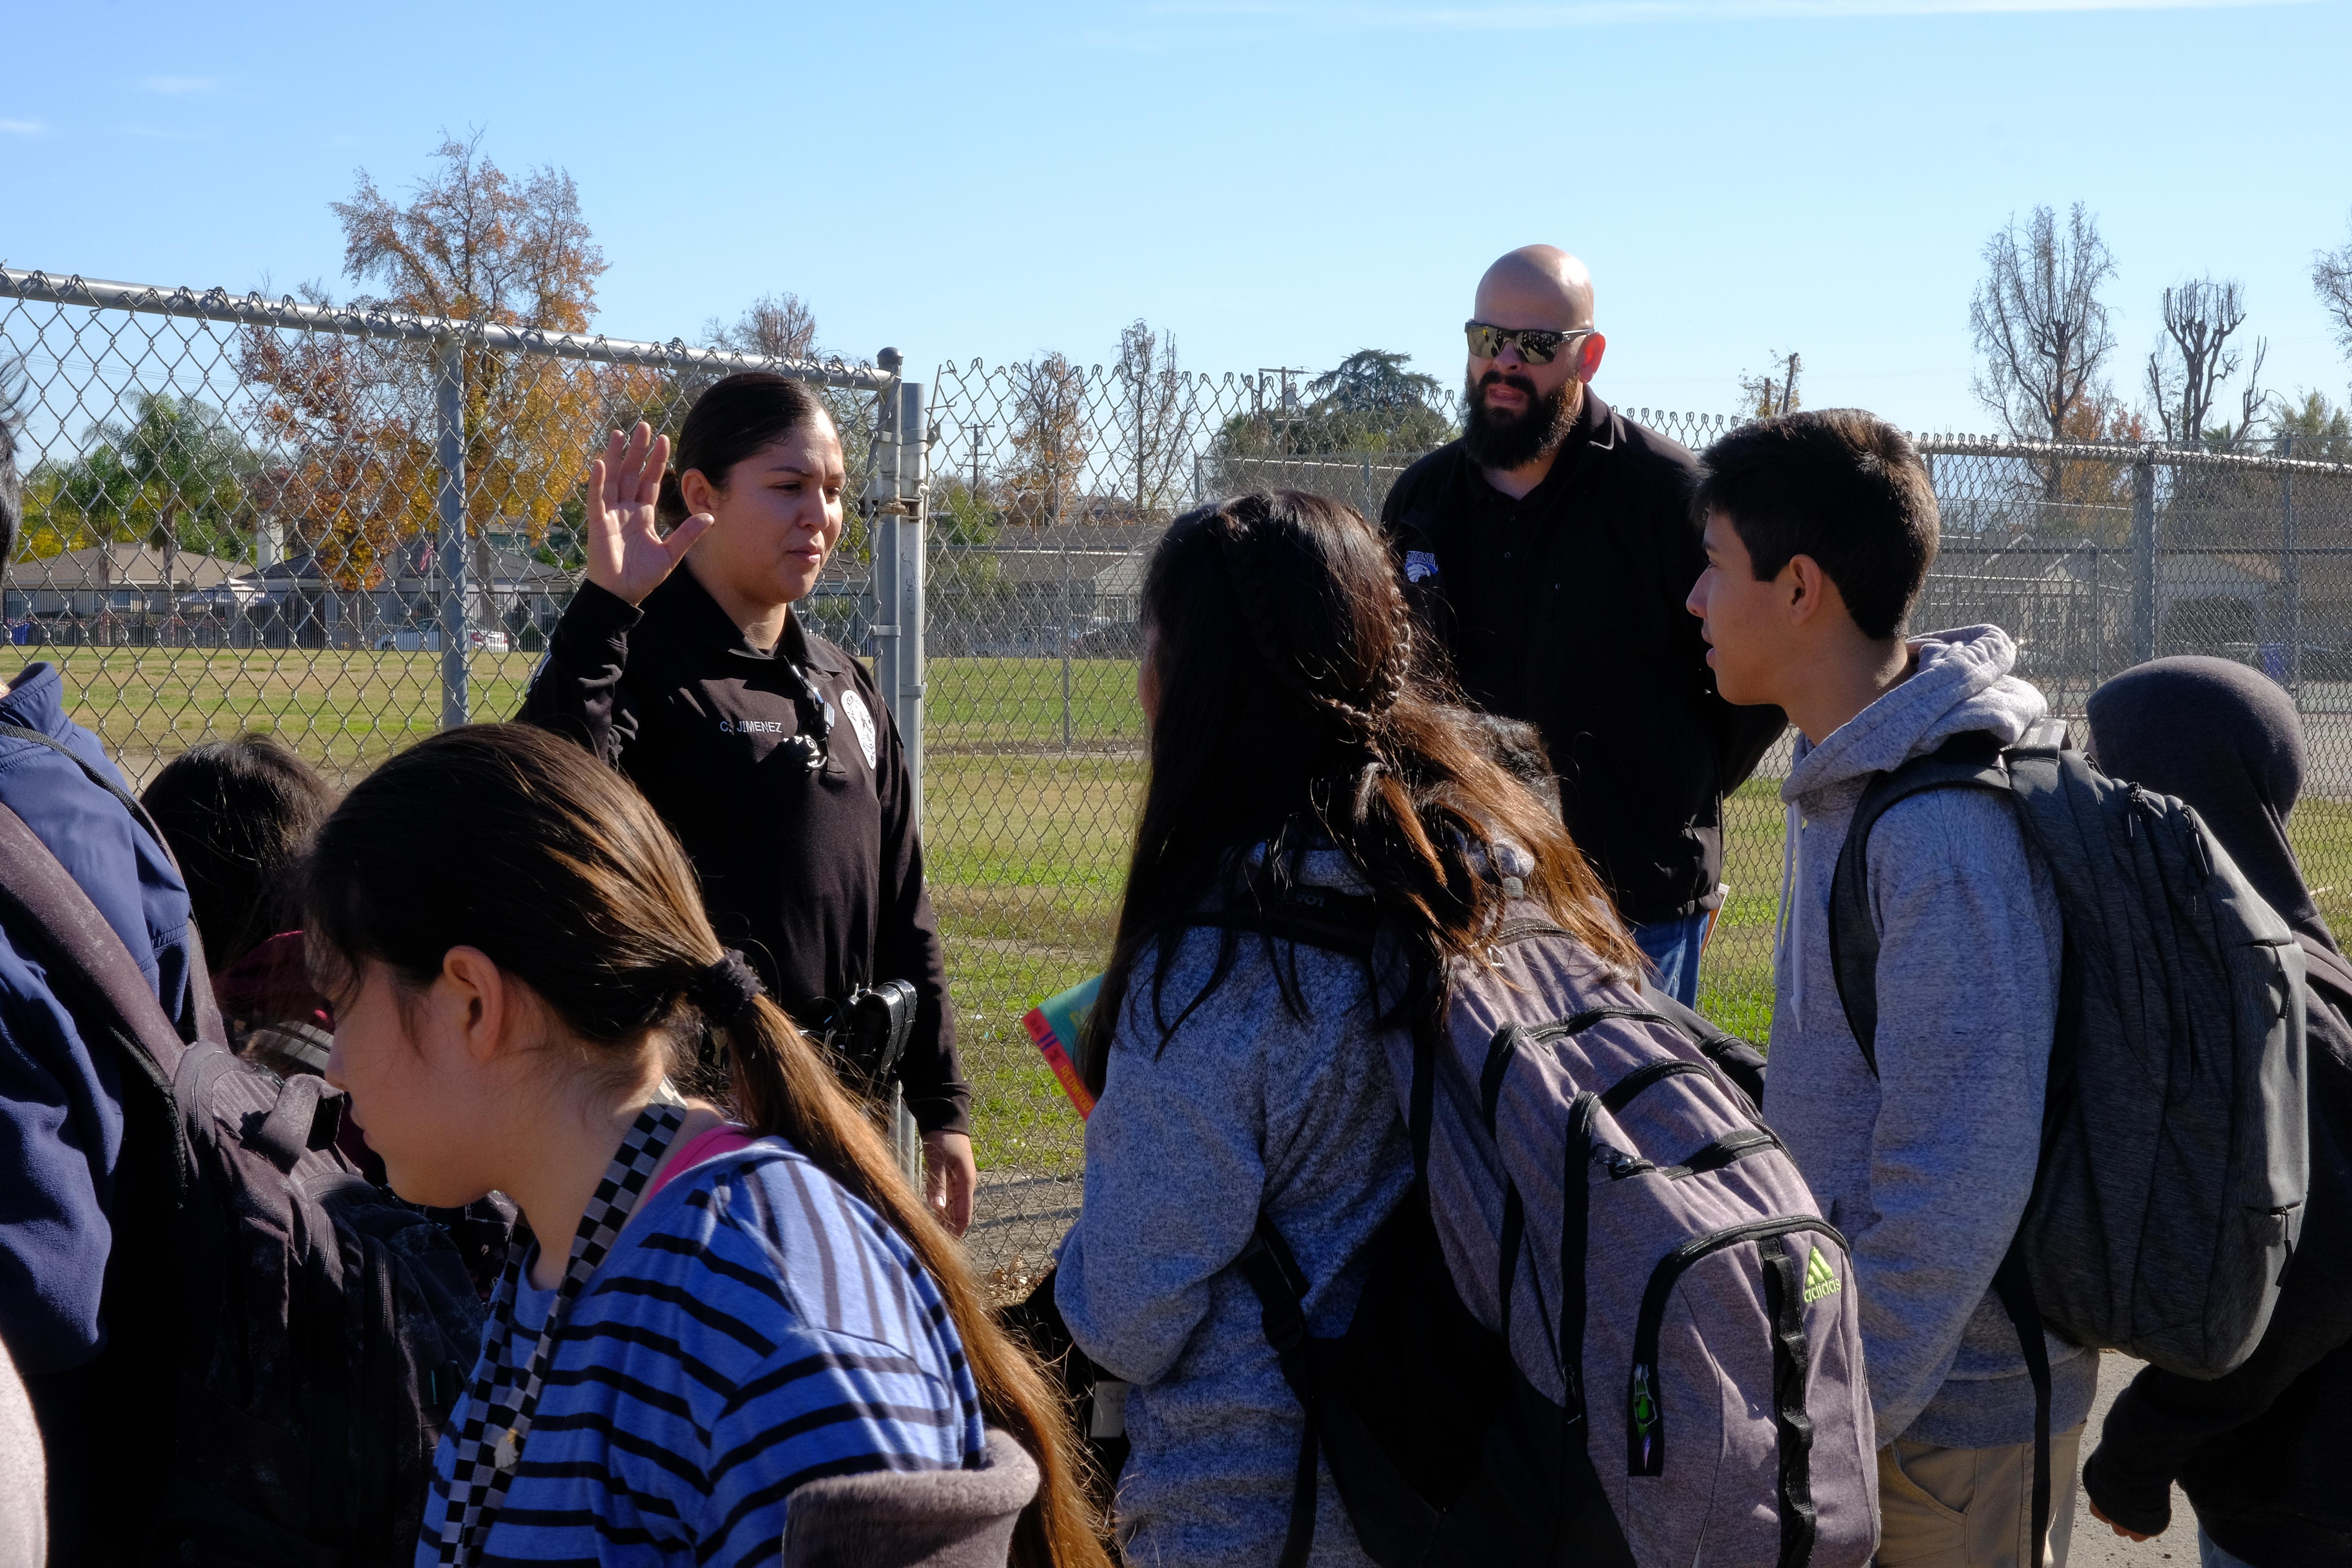 officer Jimenez talking to students waiting for PD Hellicopter